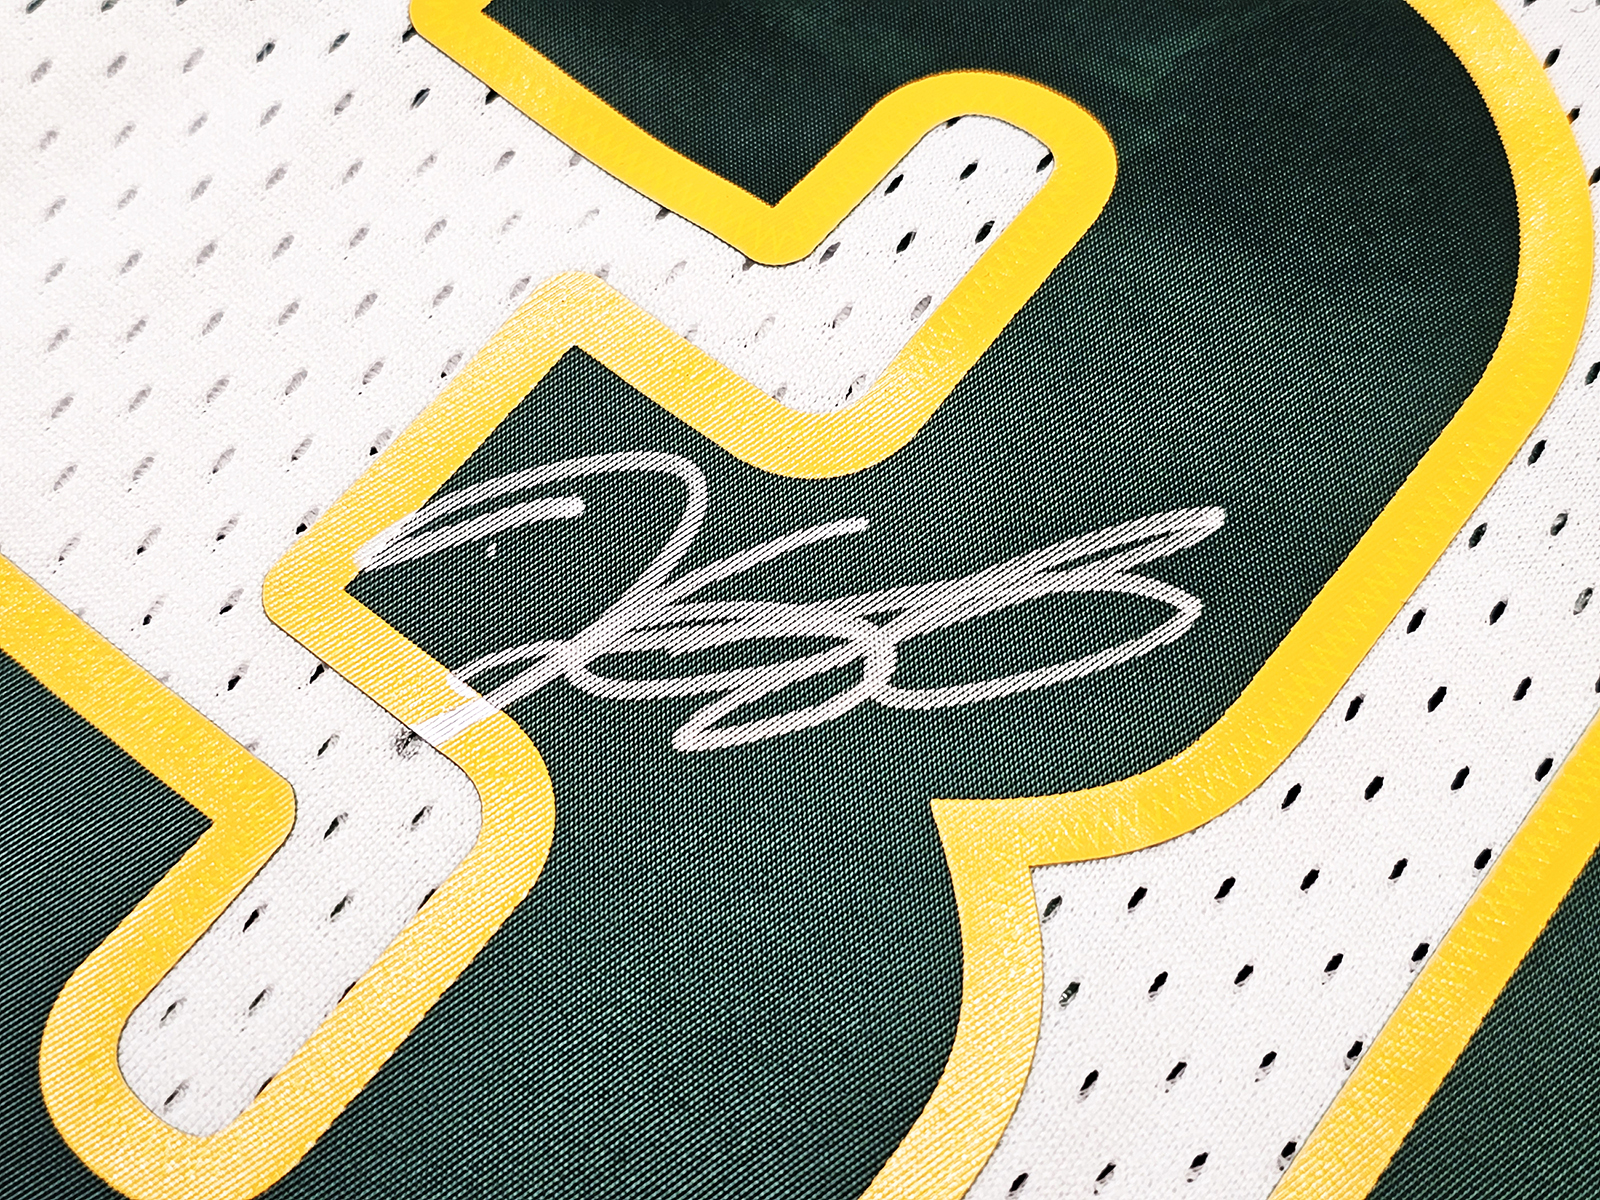 Seattle Supersonics Kevin Durant Autographed White Authentic Mitchell &  Ness Swingman 2007-08 Jersey Size L Beckett BAS QR Stock #212188